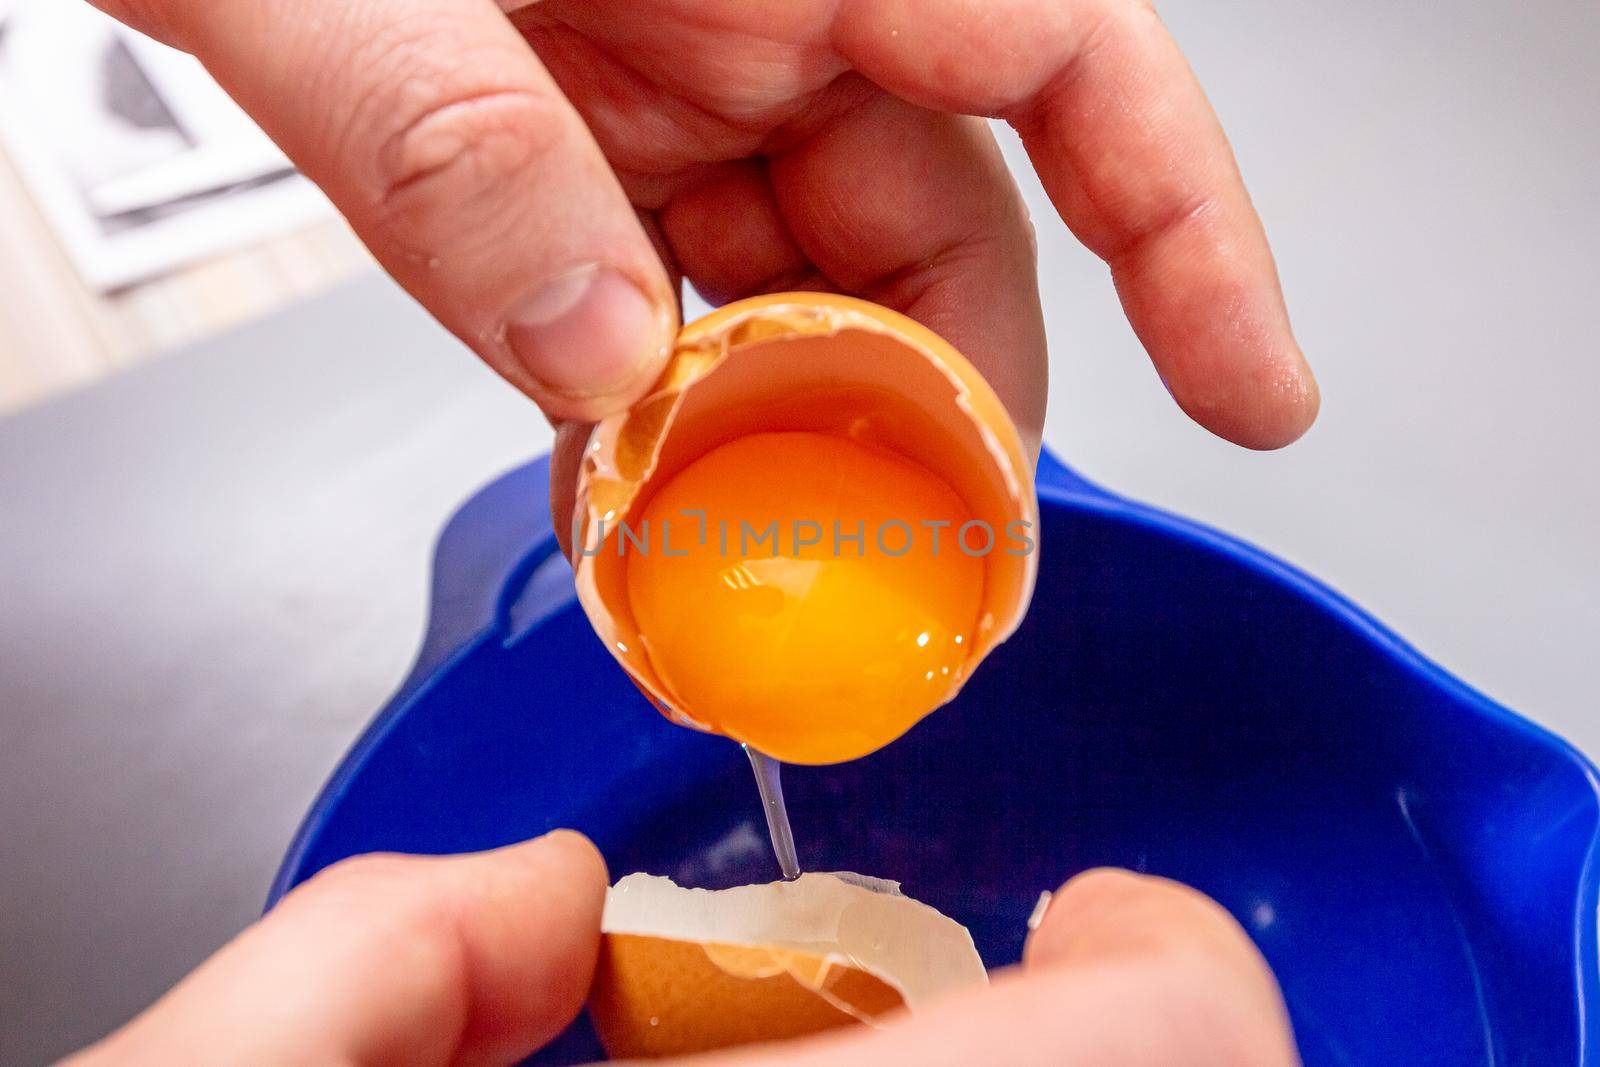 The cook separates the egg yolk from the egg white in the shell.